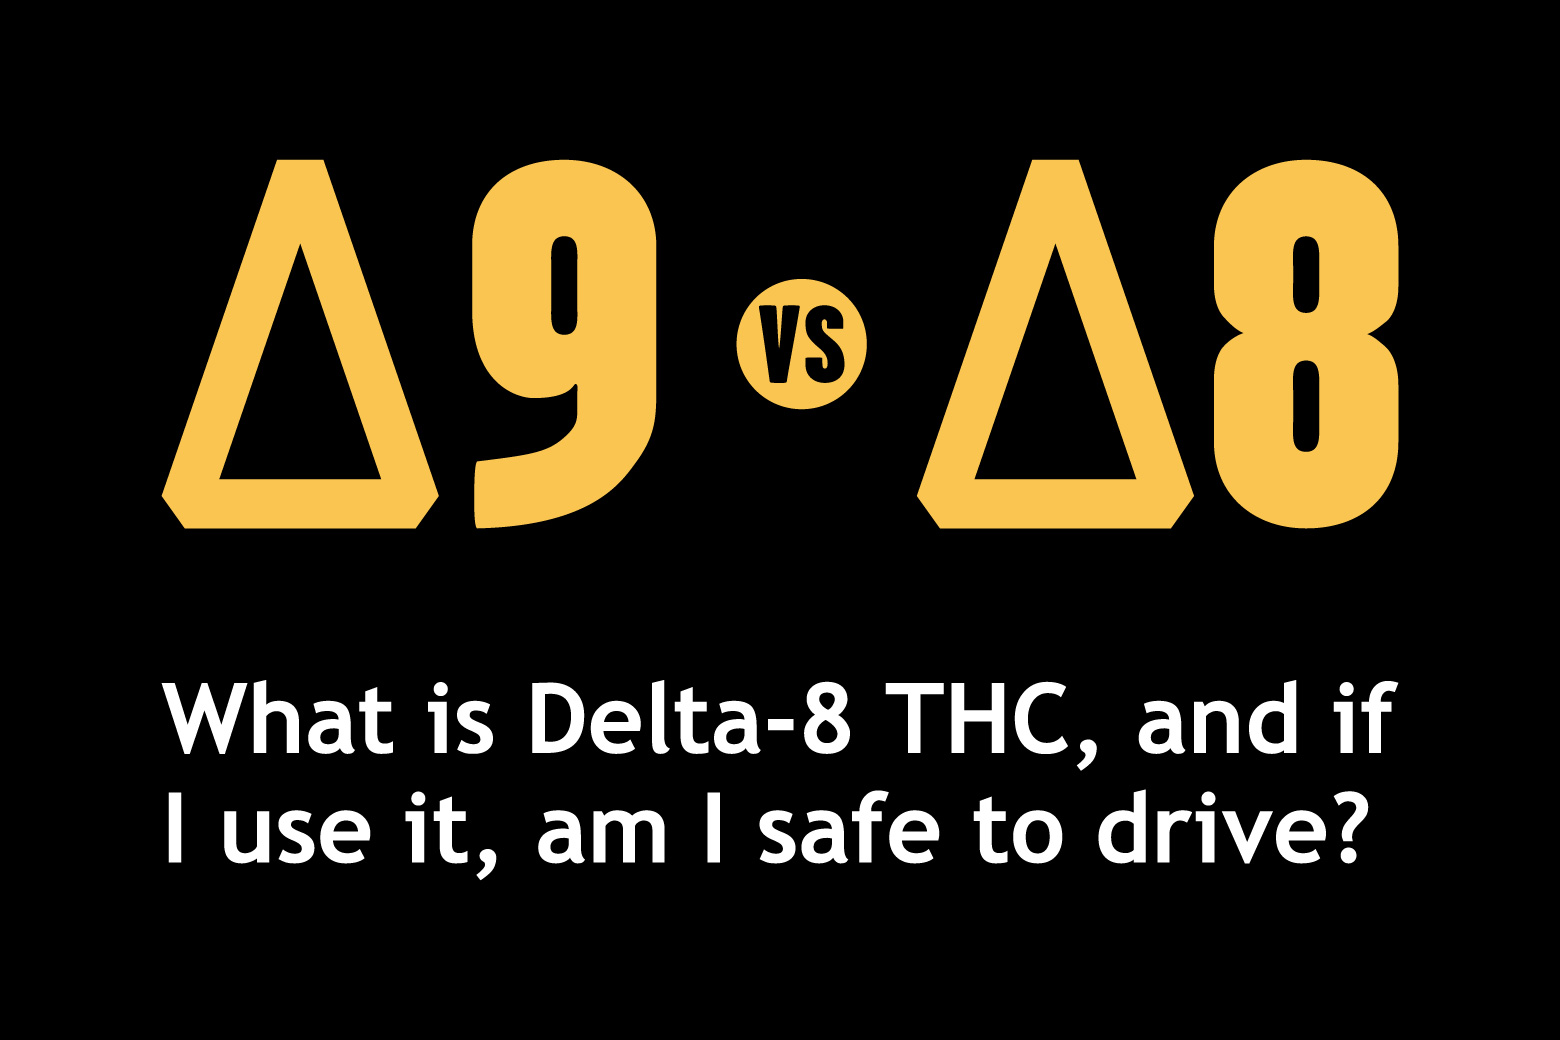 Black graphic with "Delta 9 vs Delta 8" overlay in yellow and text that reads "What is Delta-8 THC, and if I use it, am I safe to drive?"